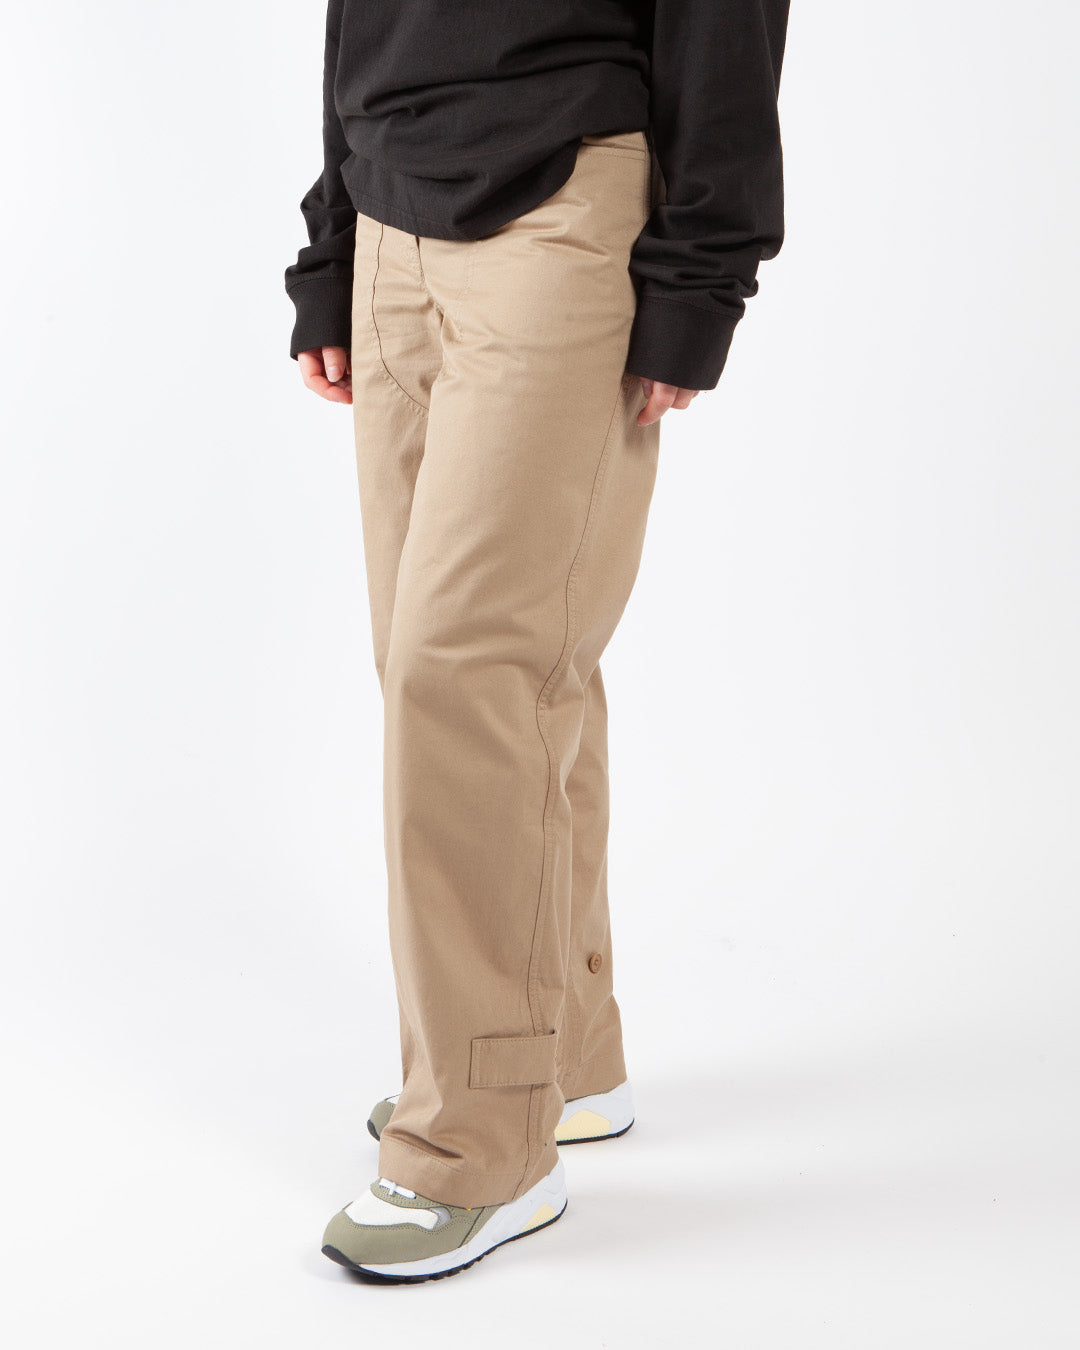 Latest WoodWood Trousers arrivals  4 products  FASHIOLAin